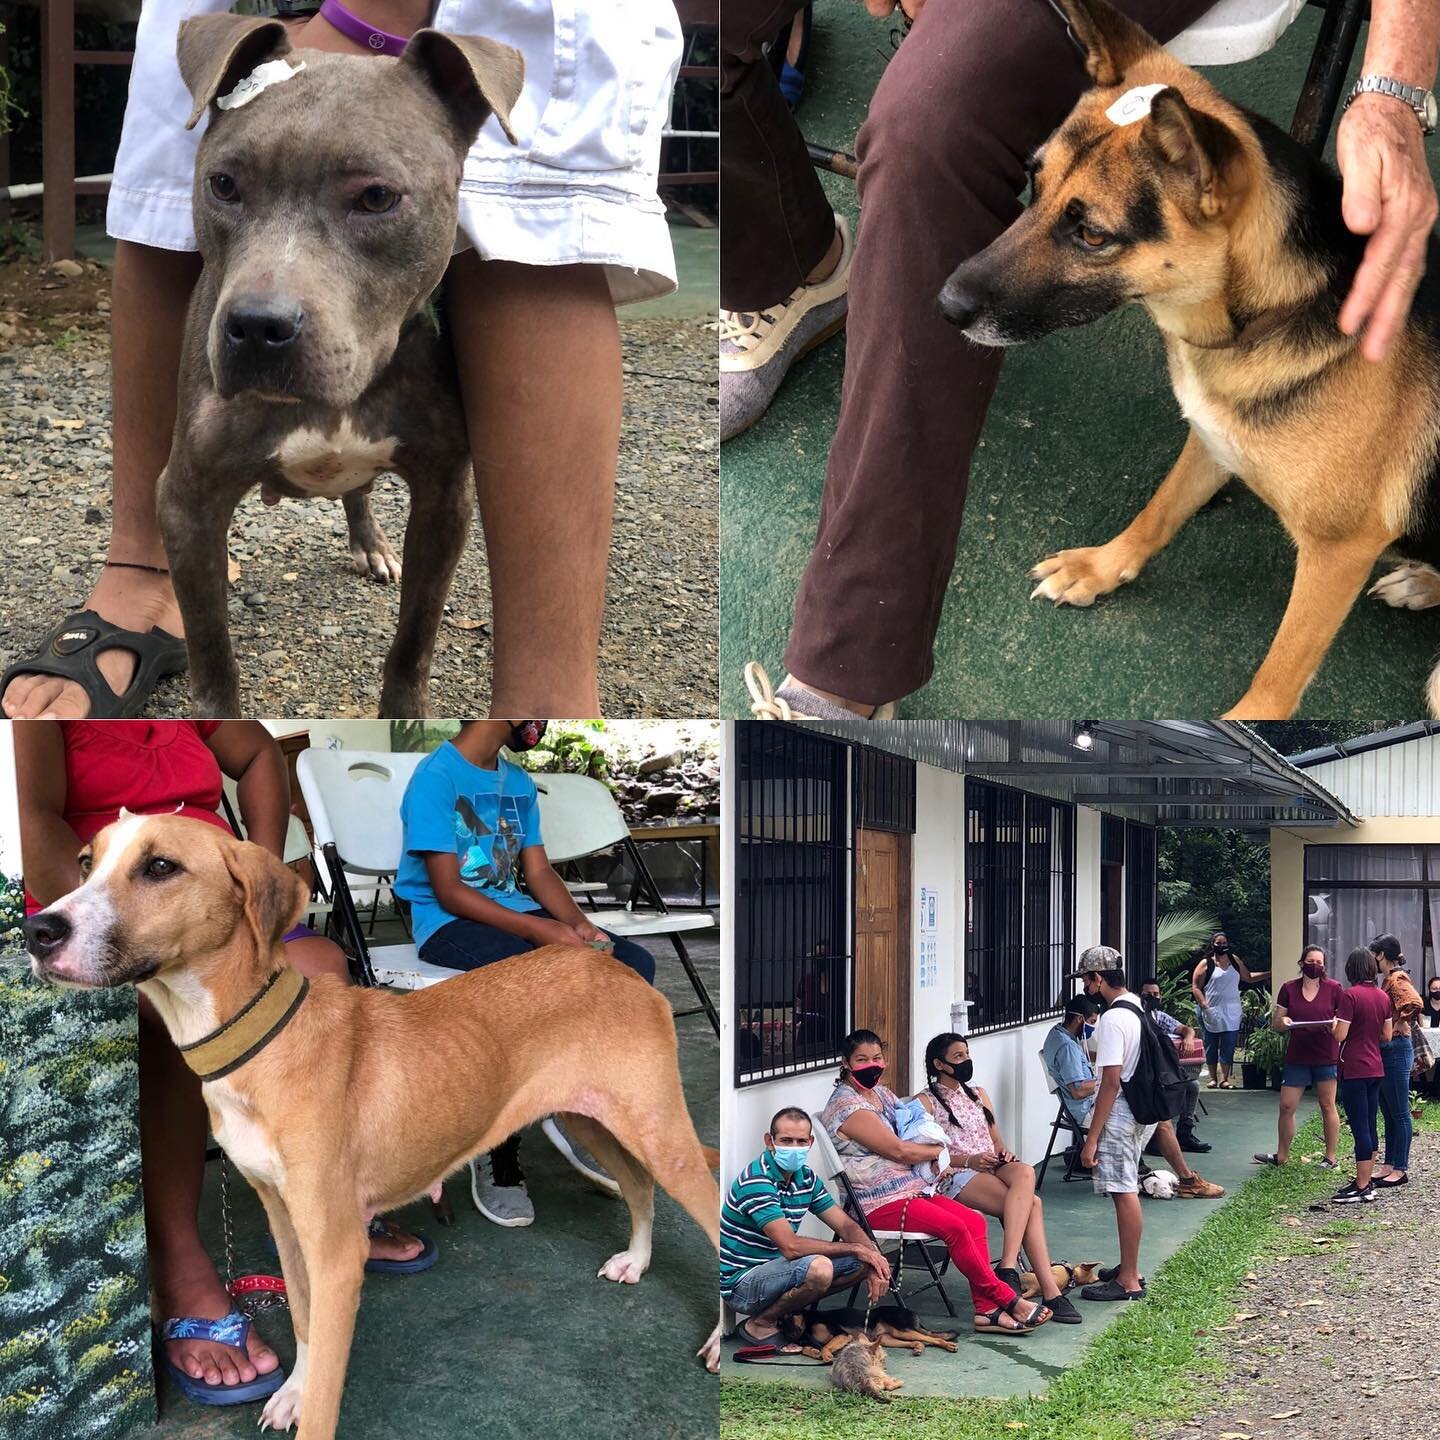 High unemployment rates due to the Covid crisis has many local families struggling to feed themselves properly, leaving little or no food to feed their furry friends. 

Over the last year we&rsquo;ve witnessed an explosive growth in our local dog pop